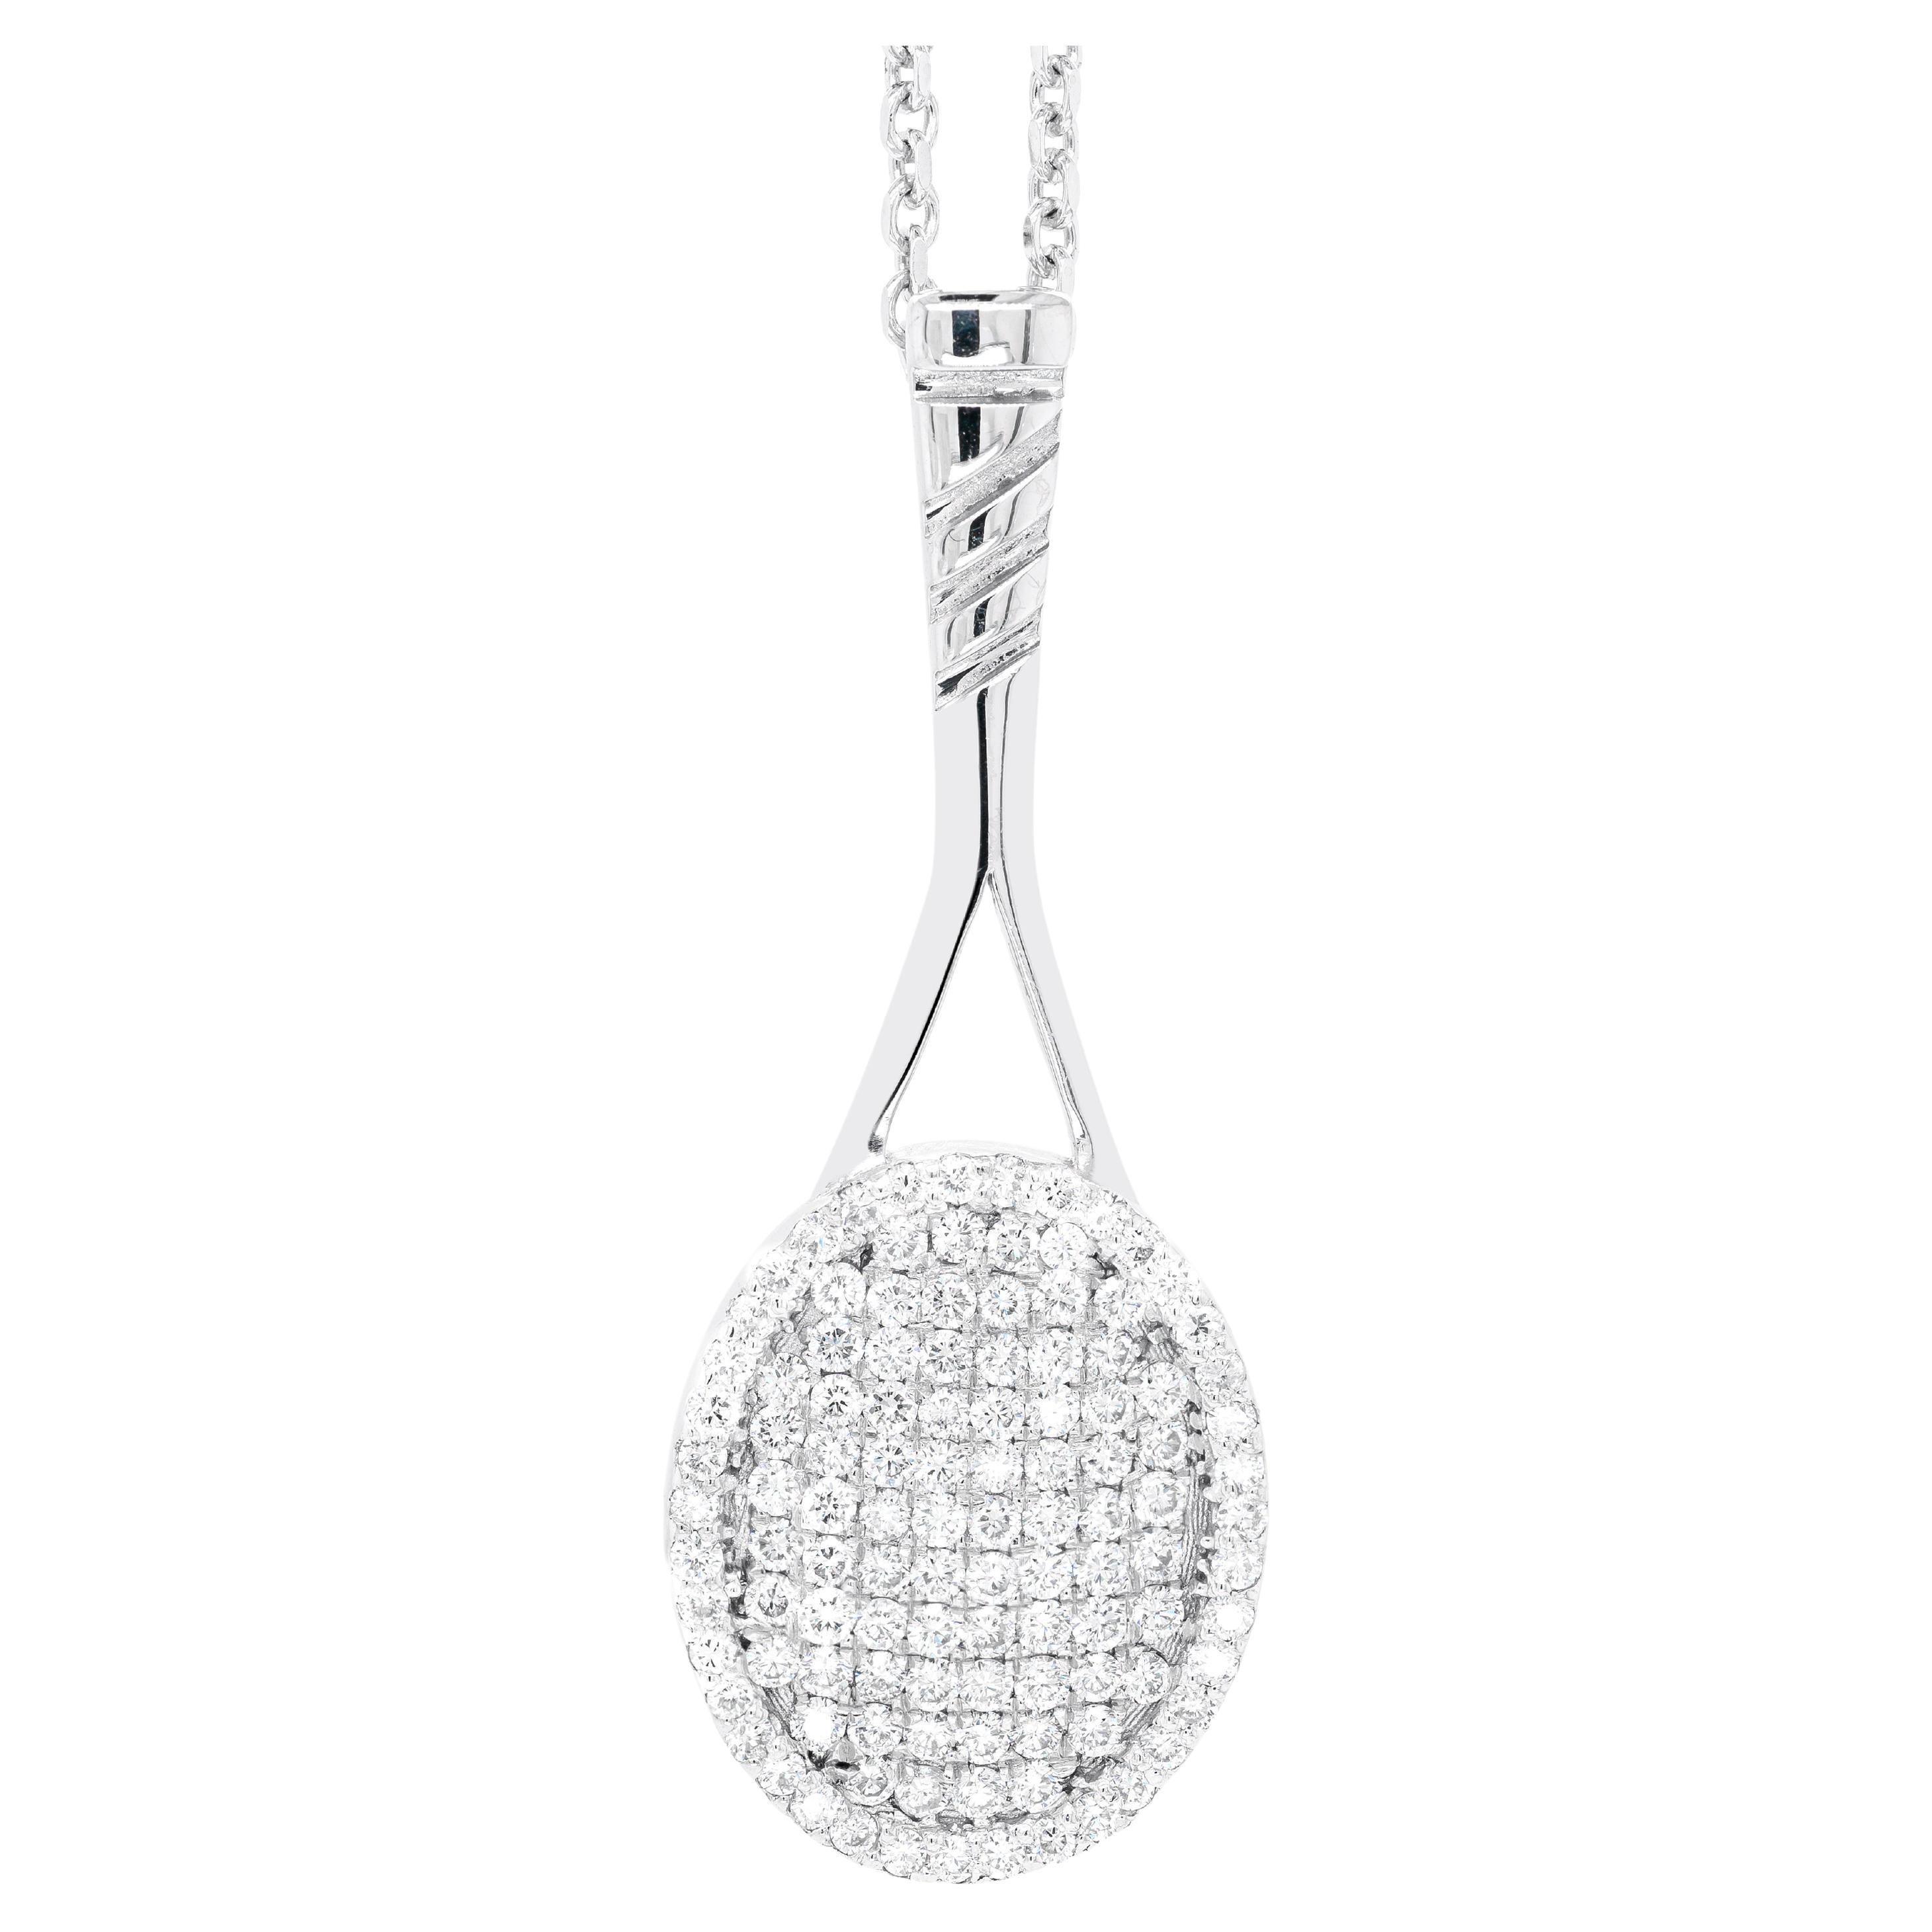 Diamond 18 Carat White Gold Tennis Racket Pendant and Chain For Sale